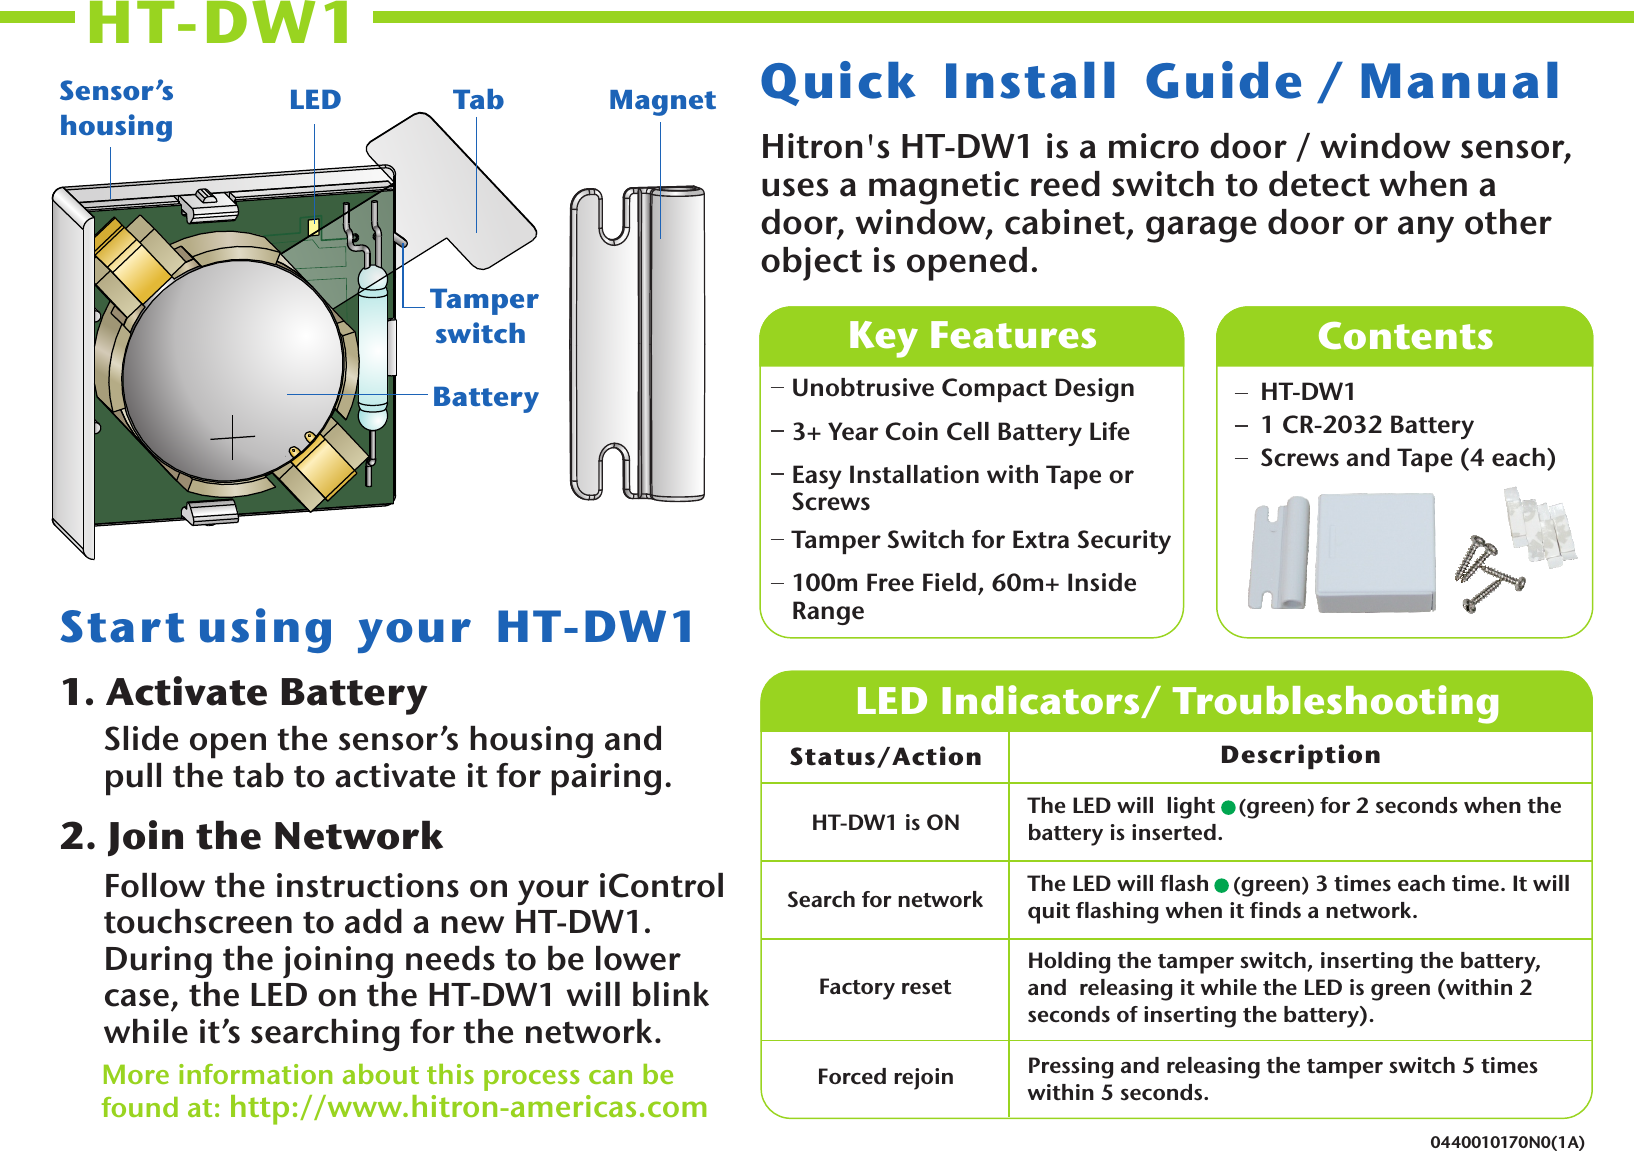 HT-DW1 0440010170N0(1A)Hitron&apos;s HT-DW1 is a micro door / window sensor, uses a magnetic reed switch to detect when a door, window, cabinet, garage door or any other object is opened.Quick  Install  Guide / Manual 1. Activate BatterySlide open the sensor’s housing and pull the tab to activate it for pairing. 2. Join the NetworkFollow the instructions on your iControl touchscreen to add a new HT-DW1.  During the joining needs to be lower case, the LED on the HT-DW1 will blink while it’s searching for the network.More information about this process can be found at: http://www.hitron-americas.com   Unobtrusive Compact Design3+ Year Coin Cell Battery LifeEasy Installation with Tape or ScrewsTamper Switch for Extra Security100m Free Field, 60m+ Inside RangeKey Features  ContentsHT-DW1 1 CR-2032 BatteryScrews and Tape (4 each) LED Indicators/ TroubleshootingStatus/Action Description The LED will  light     green) for 2 seconds when the battery is inserted. (The LED will flash    (green) 3 times each time. It will quit flashing when it finds a network.Holding the tamper switch, inserting the battery, and  releasing it while the LED is green (within 2 seconds of inserting the battery).Pressing and releasing the tamper switch 5 times within 5 seconds.Start using  your  HT-DW1 HT-DW1 is ONSearch for networkFactory resetForced rejoinBatteryLEDSensor’s housing Tab Tamper switchMagnet